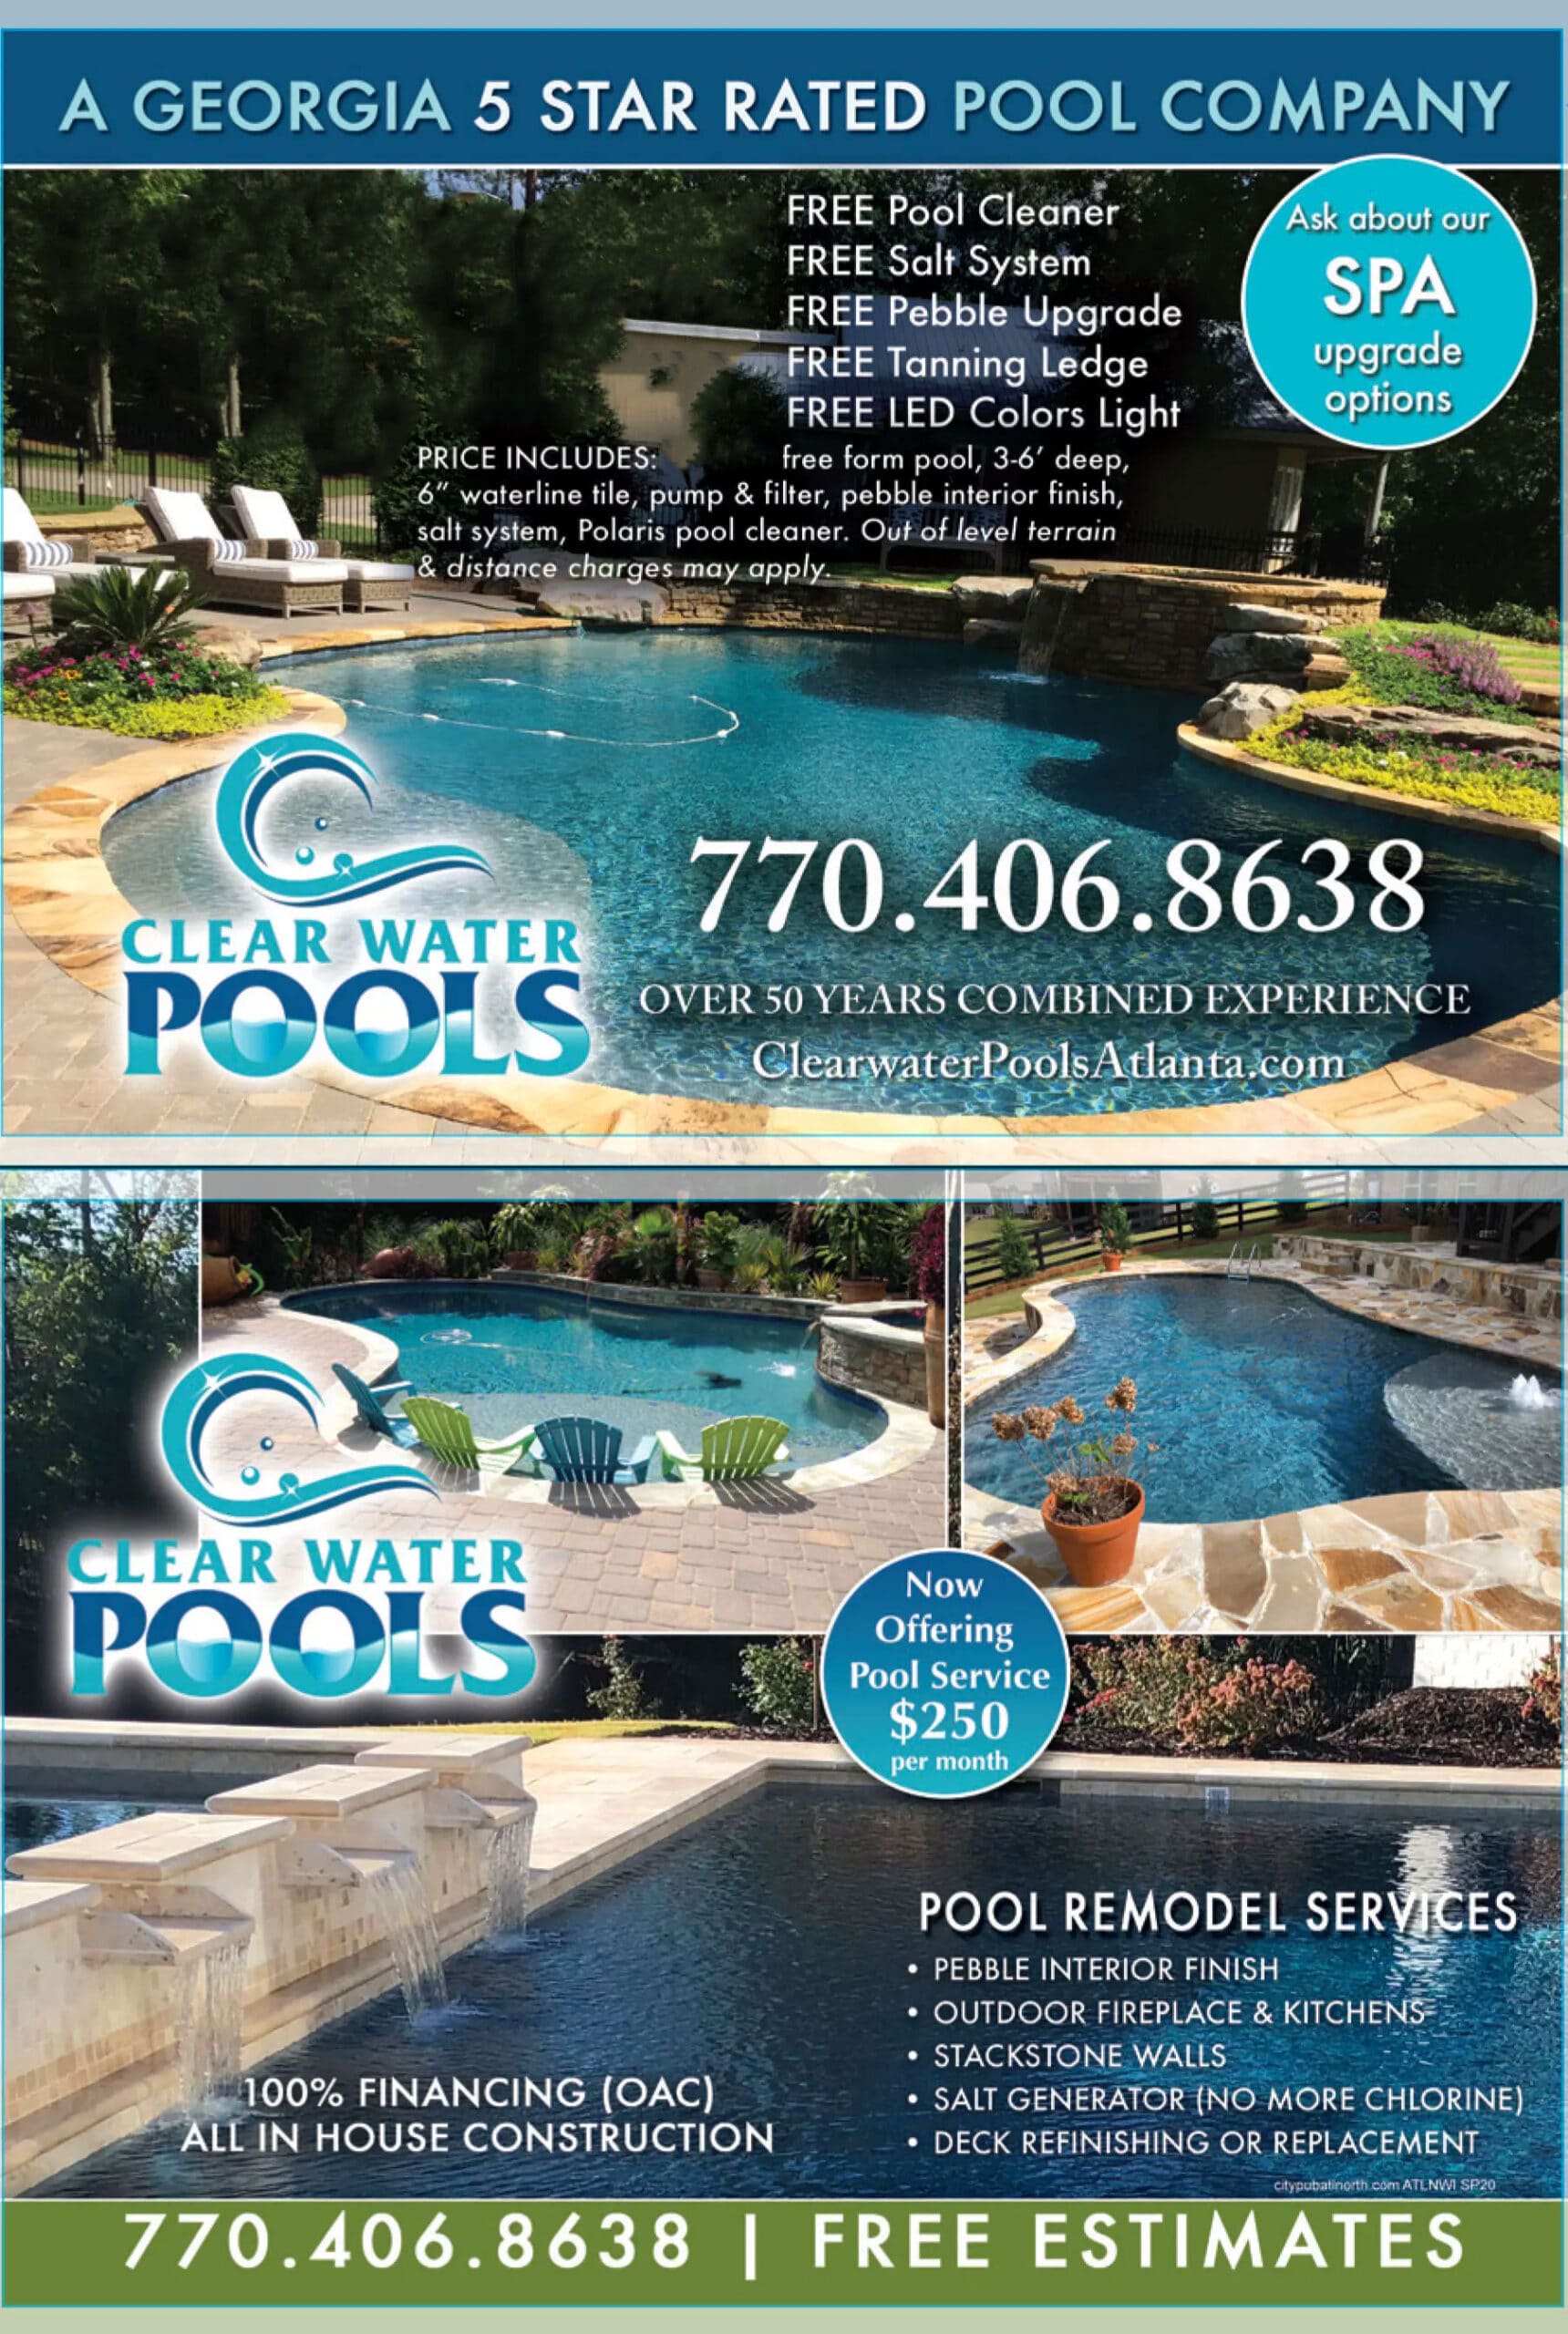 Clear-Water-Pools-Specials-With-No-Prices-Or-Size